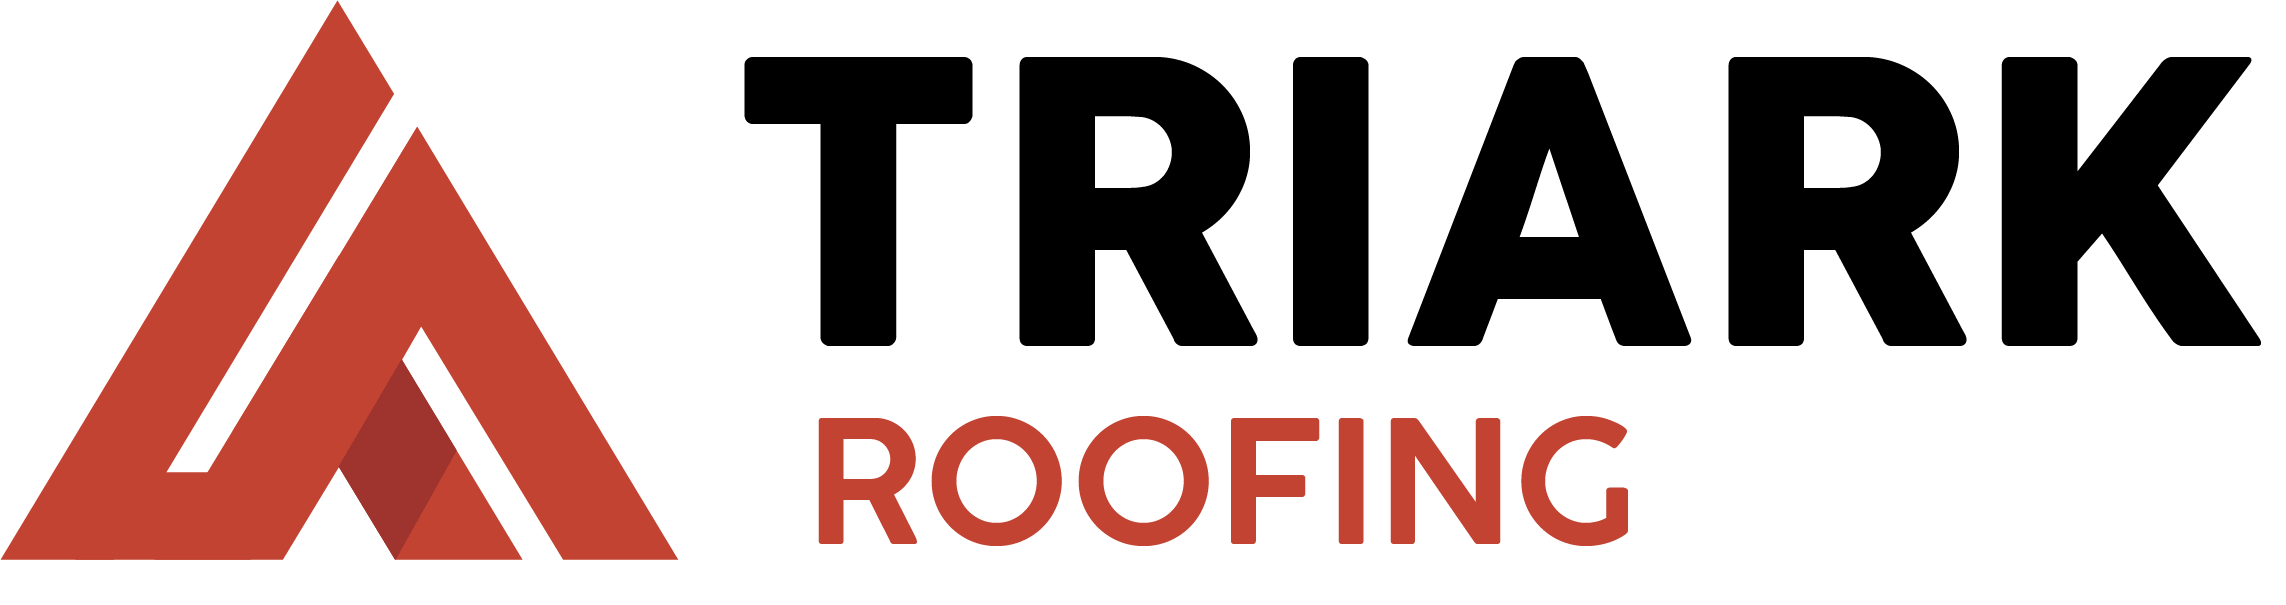 Triark Roofing: Roseville and the Greater Sacramento Area Top Roofers